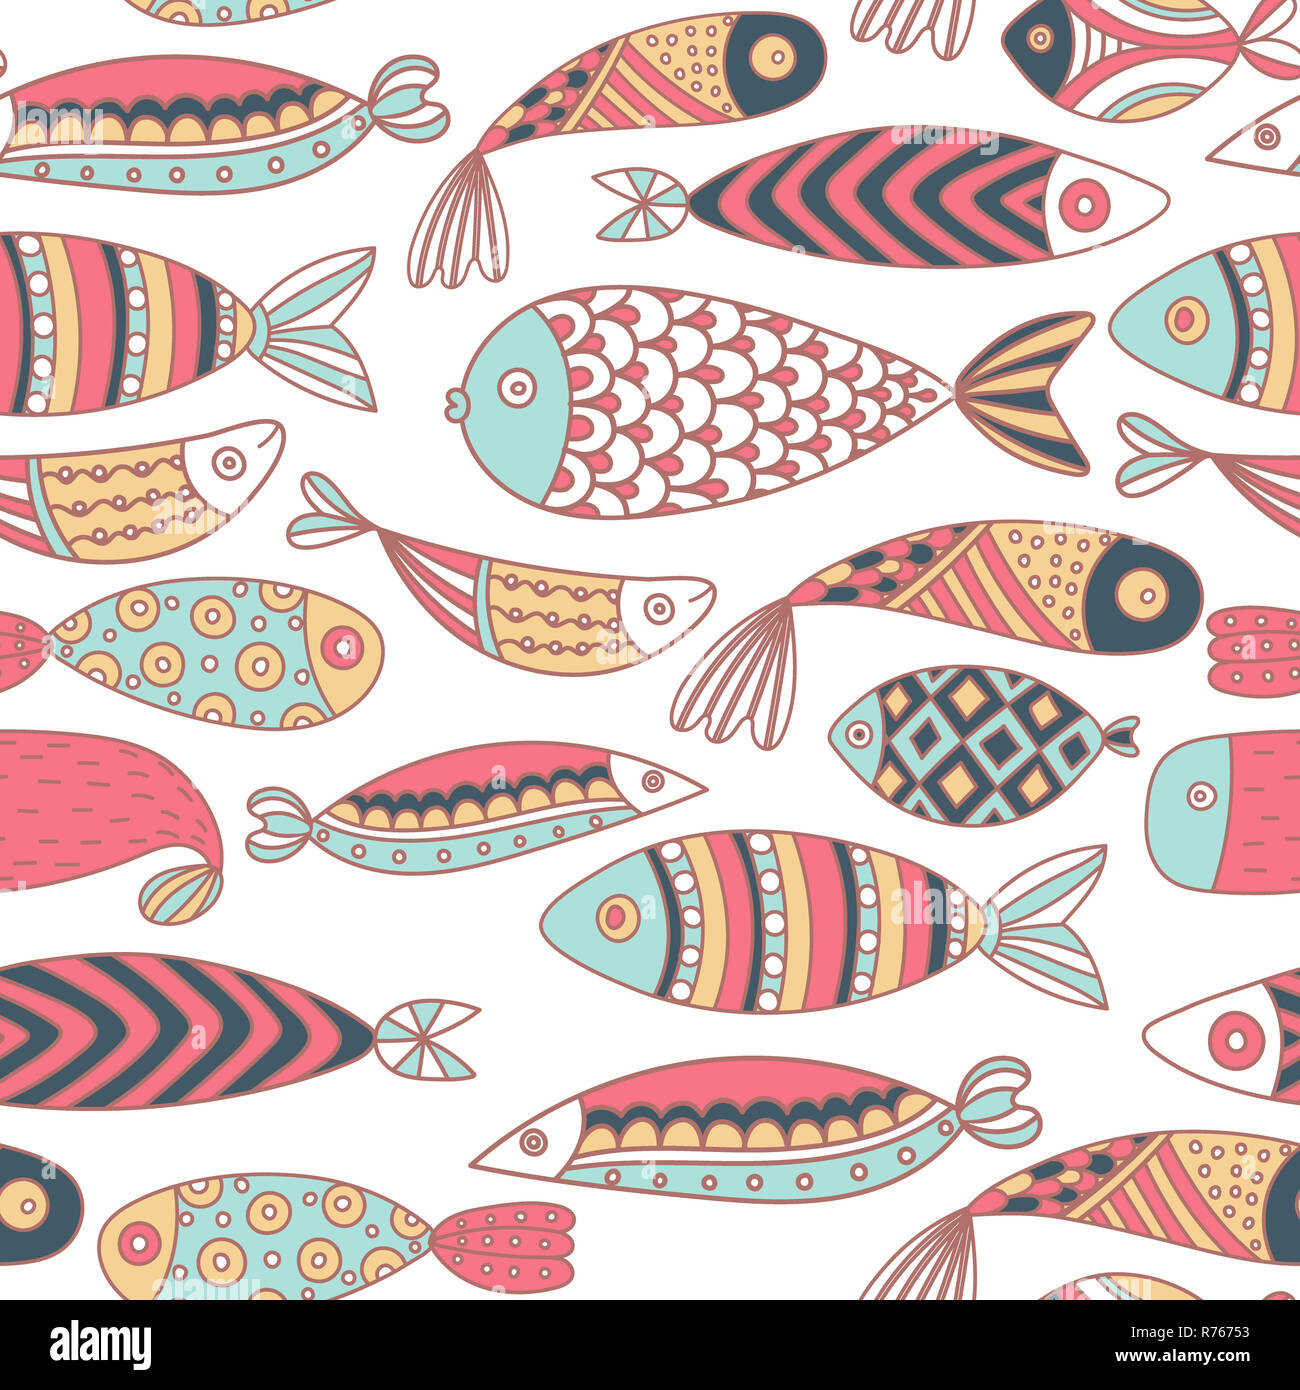 Seamless pattern with fishes. Hand drawn undersea world. Colorful artistic background. Aquarium. Can be used for wallpaper, textiles, wrapping, card, cover Stock Photo